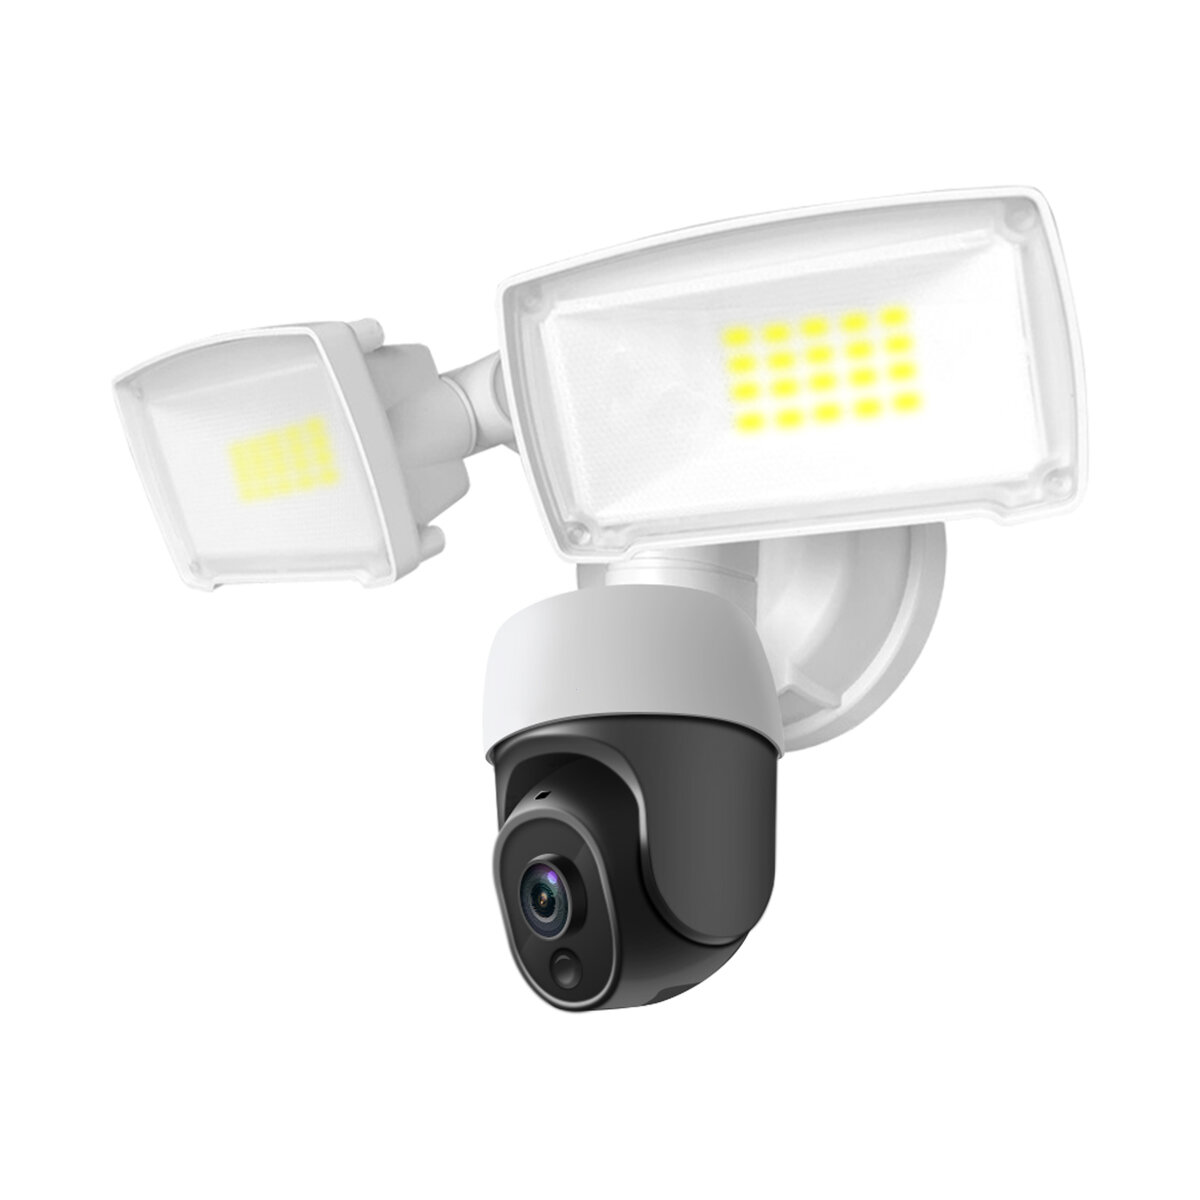 

ESCAM QF613 2MP WiFi Floodlight IP Camera PTZ Color Night Vision Two-way Audio H.265 IP66 Waterproof Outdoors Monitoring